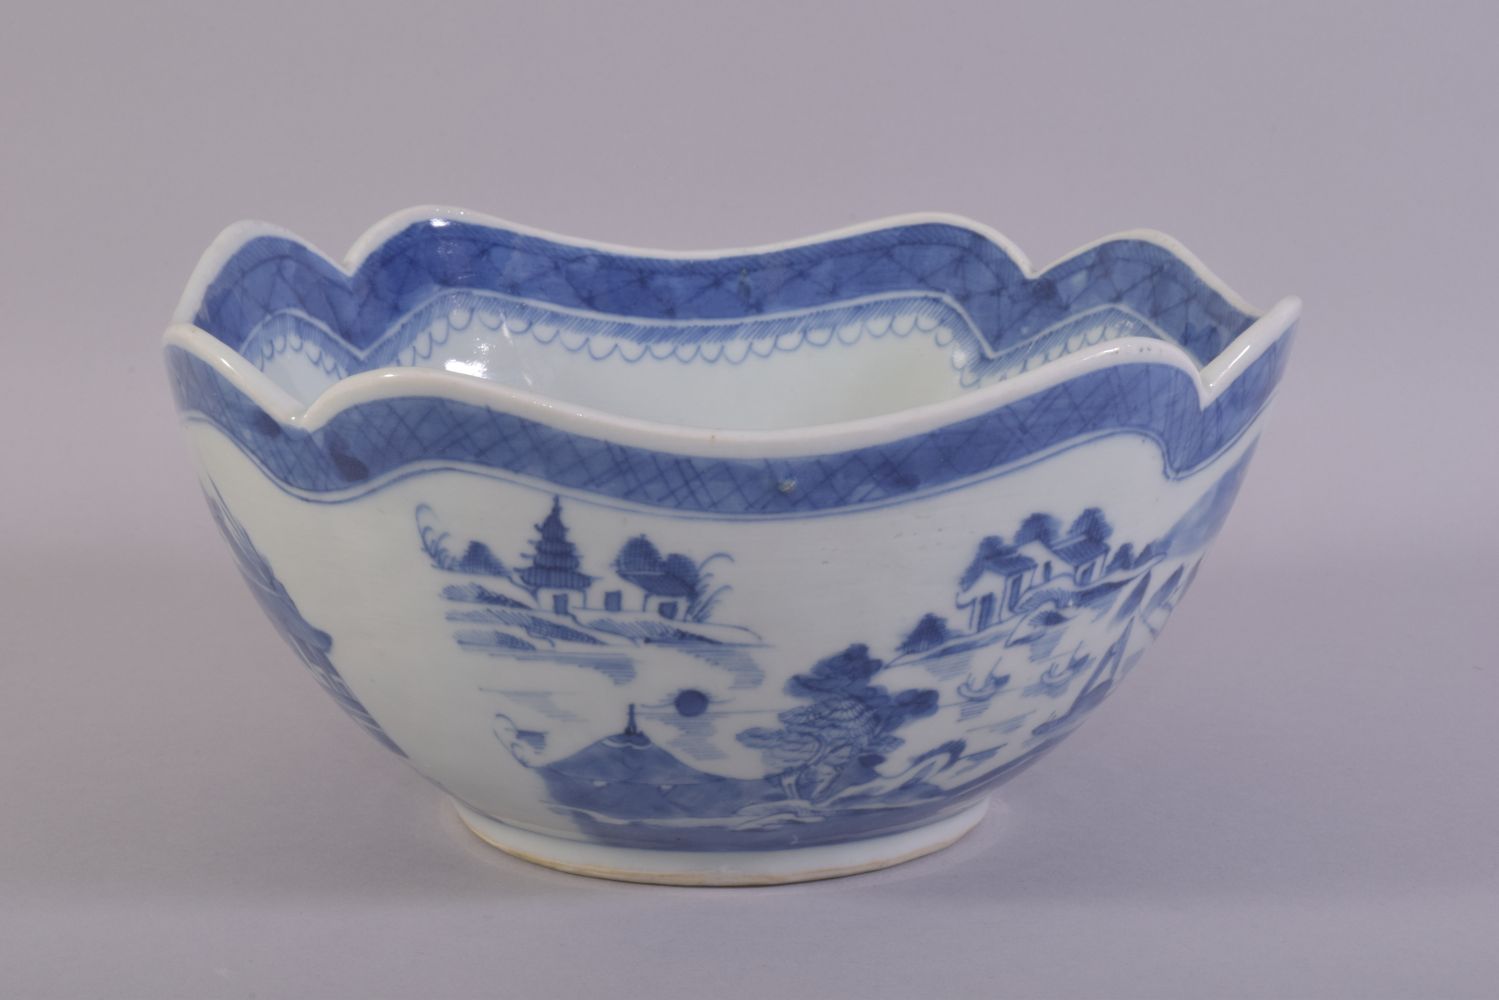 A CHINESE BLUE AND WHITE PORCELAIN BOWL, decorated with a landscape including buildings, boats and - Image 2 of 6